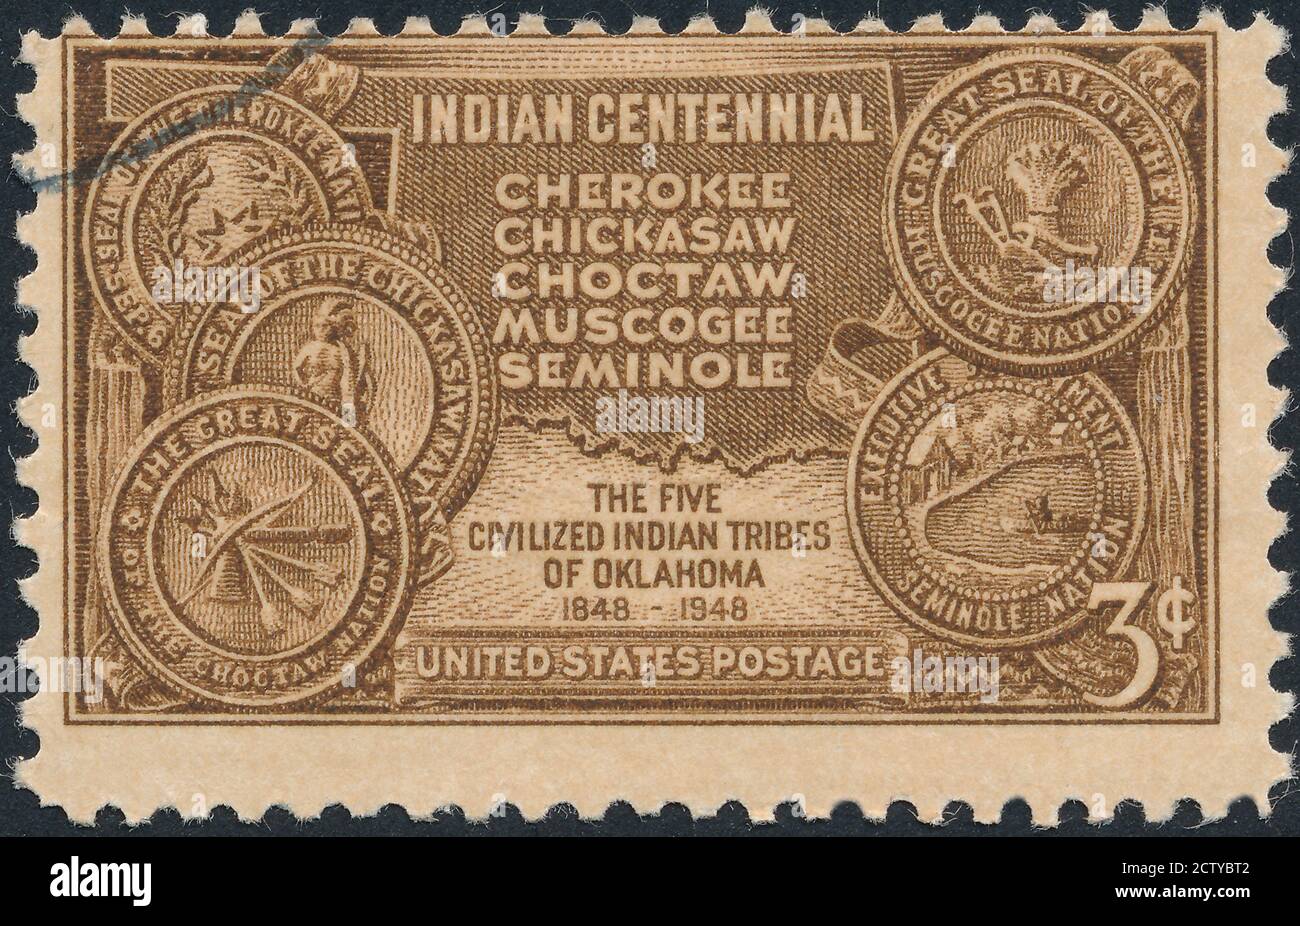 Indian Territory Of Oklahoma Stamp stock photo Oklahoma, USA, Cherokee Culture, Cherokee Ethnicity, Indian Culture.Cancelled Stamp From The United Sta Stock Photo